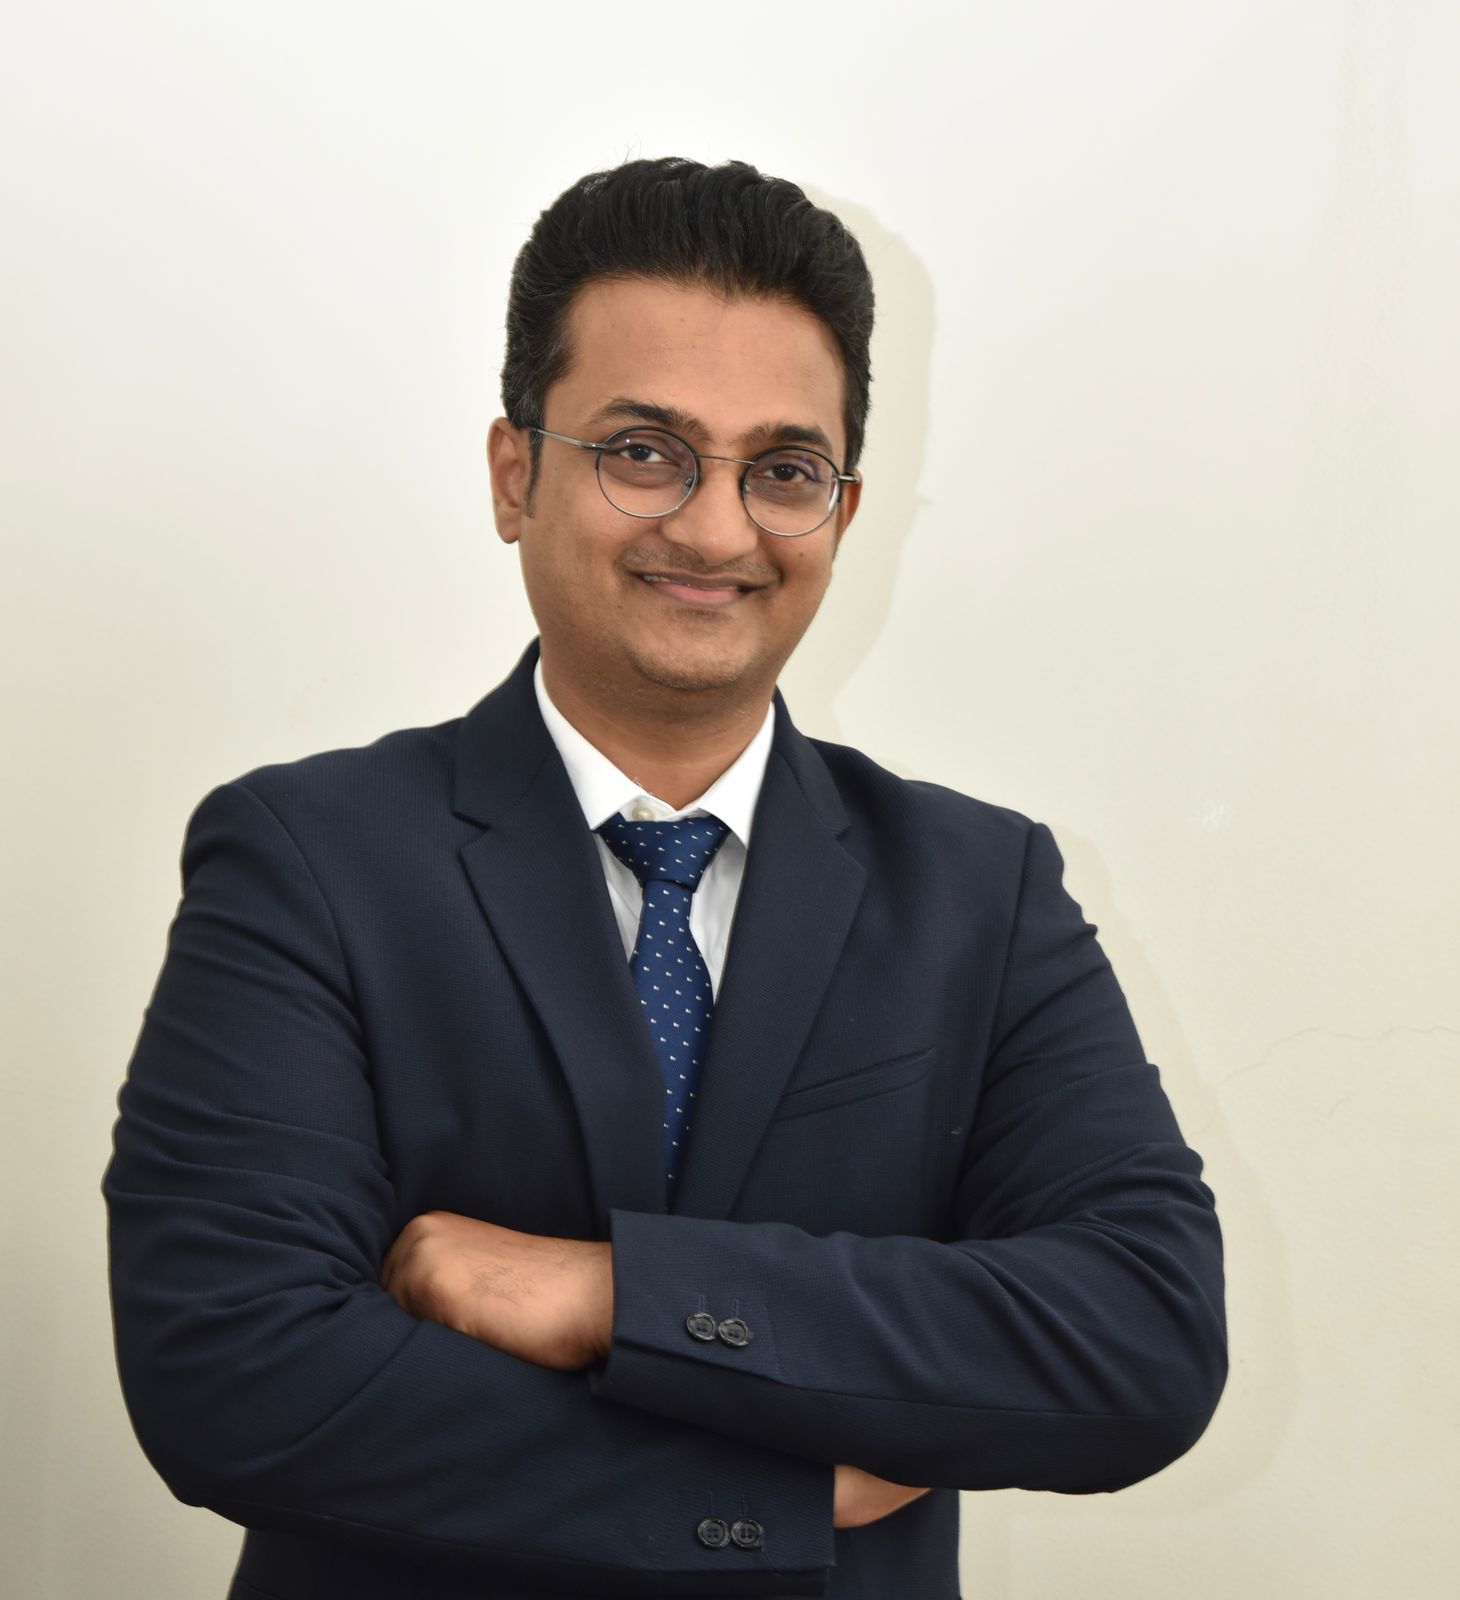 Meet Dr. Altamash Shaikh Mumbai based Consultant Endocrinologist, Diabetologist and Metabolic Super specialist who shares his Professional Journey on the eve of Doctors' Day - Hello Mumbai News